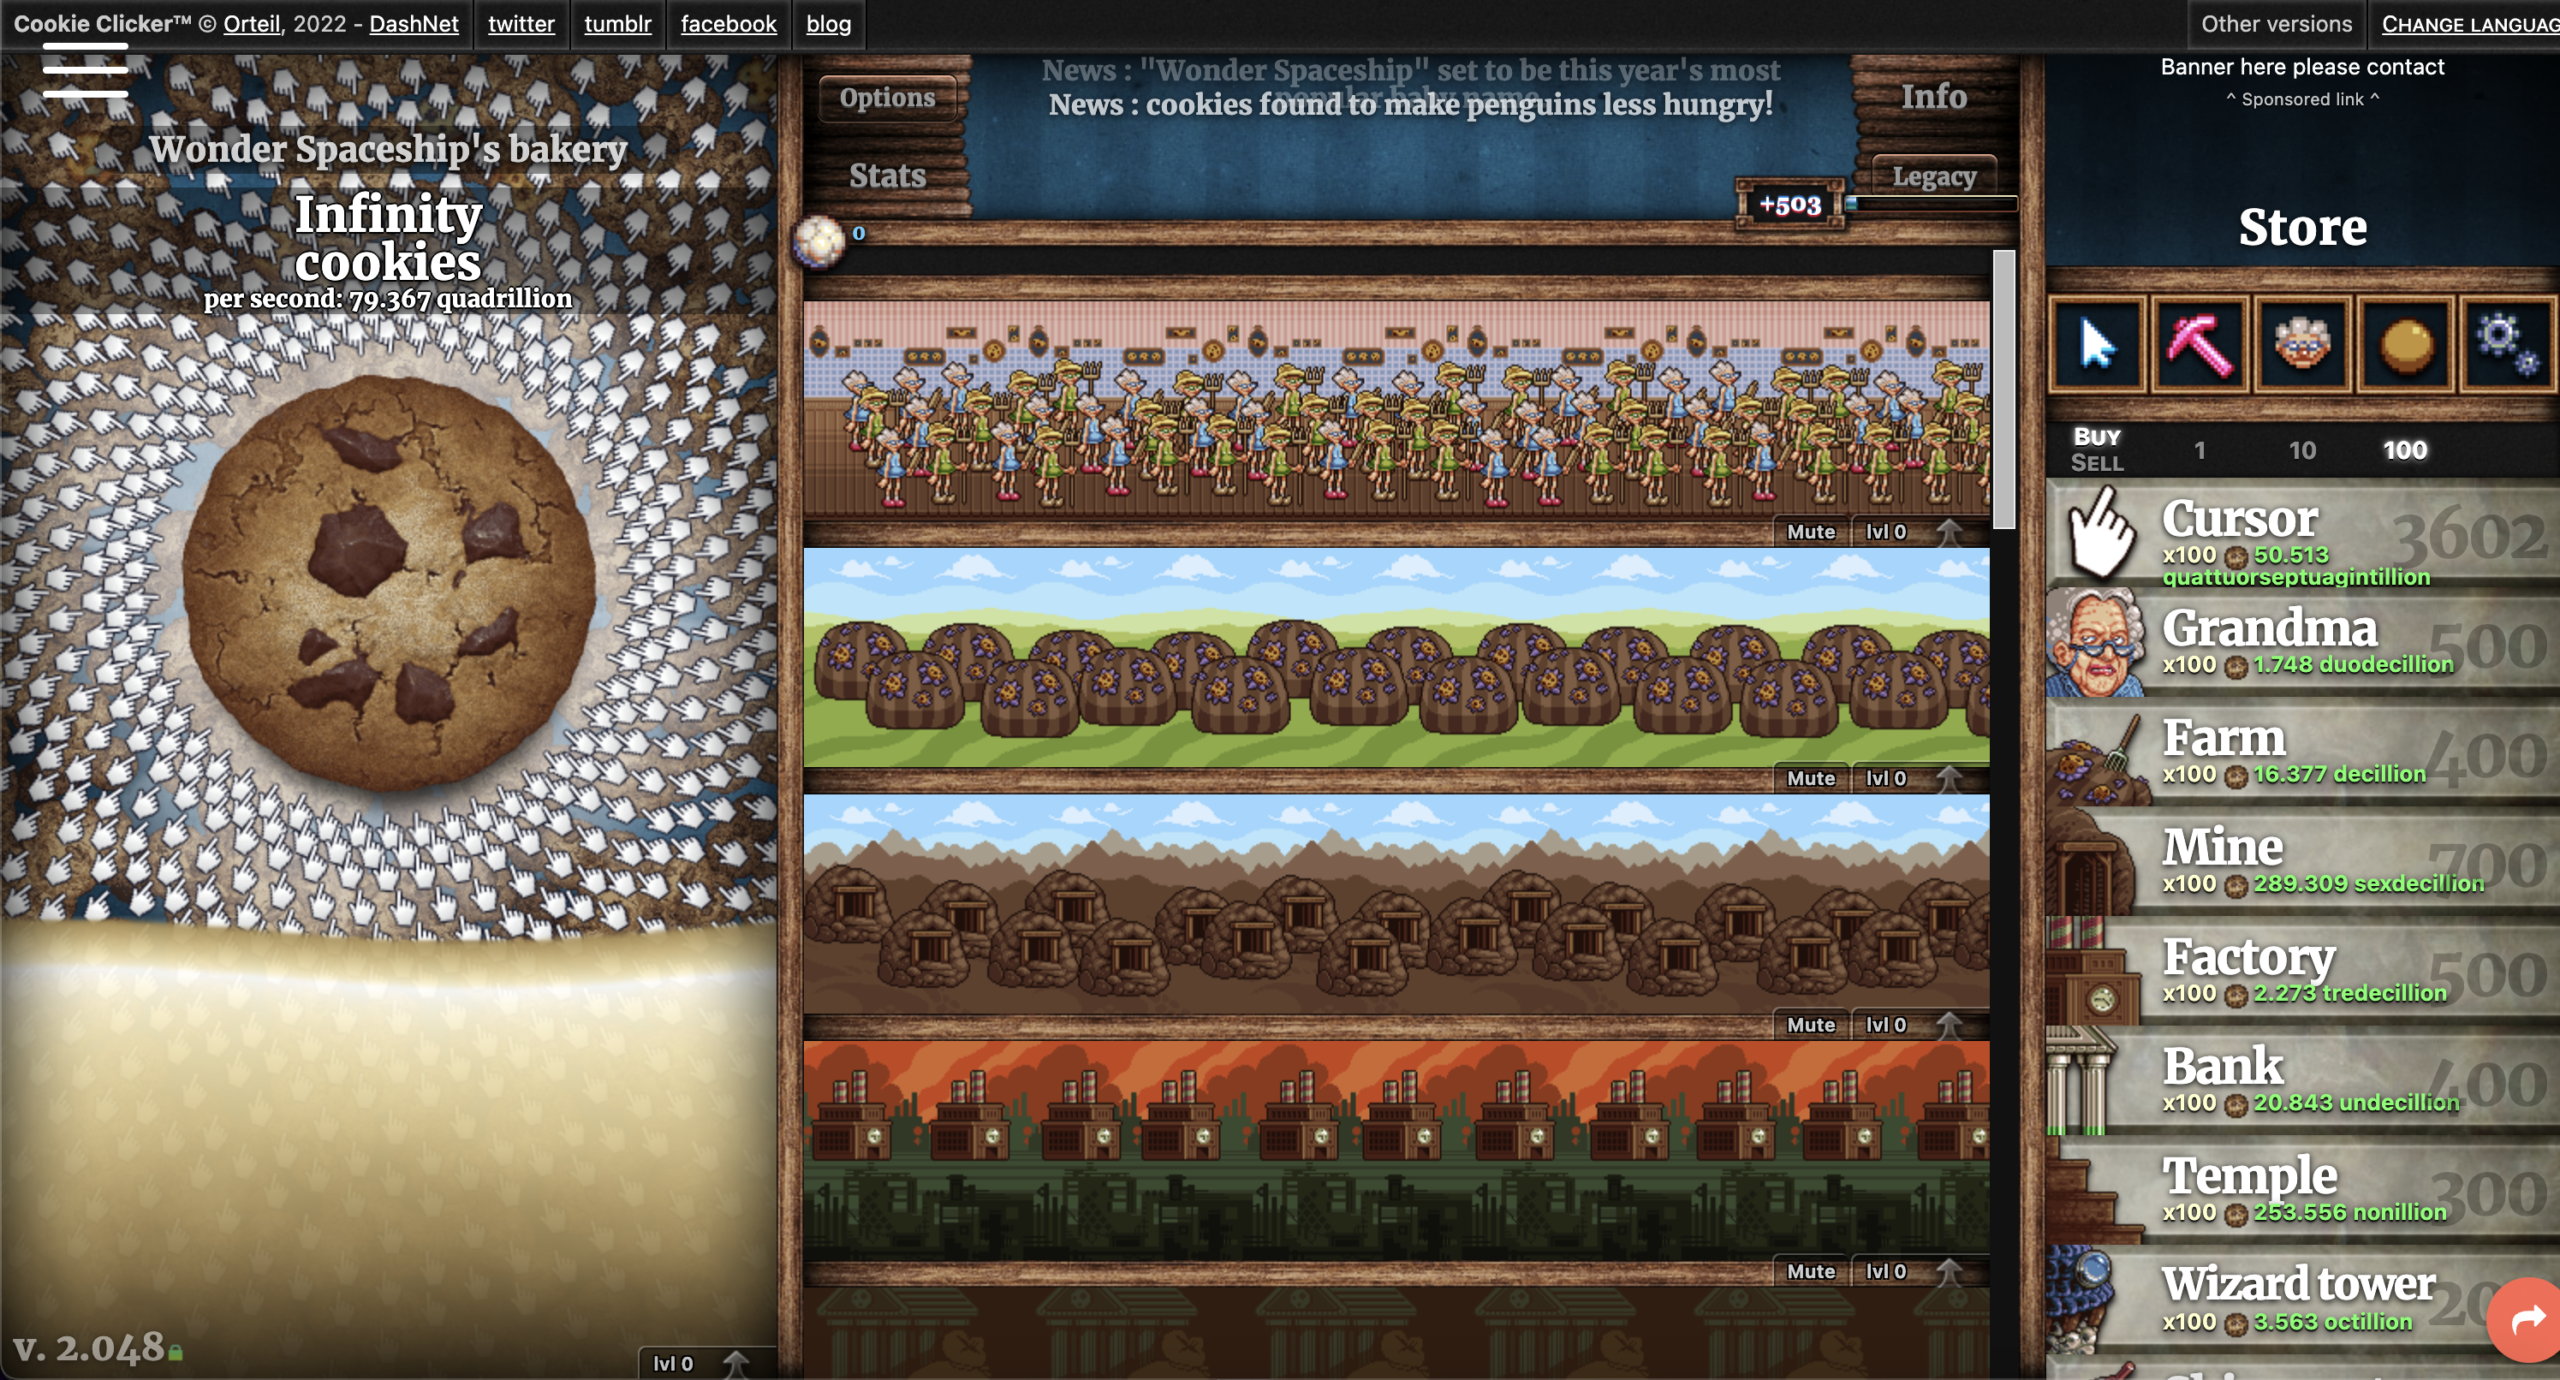 Cookie clicker unblocked game : What is it & how to play